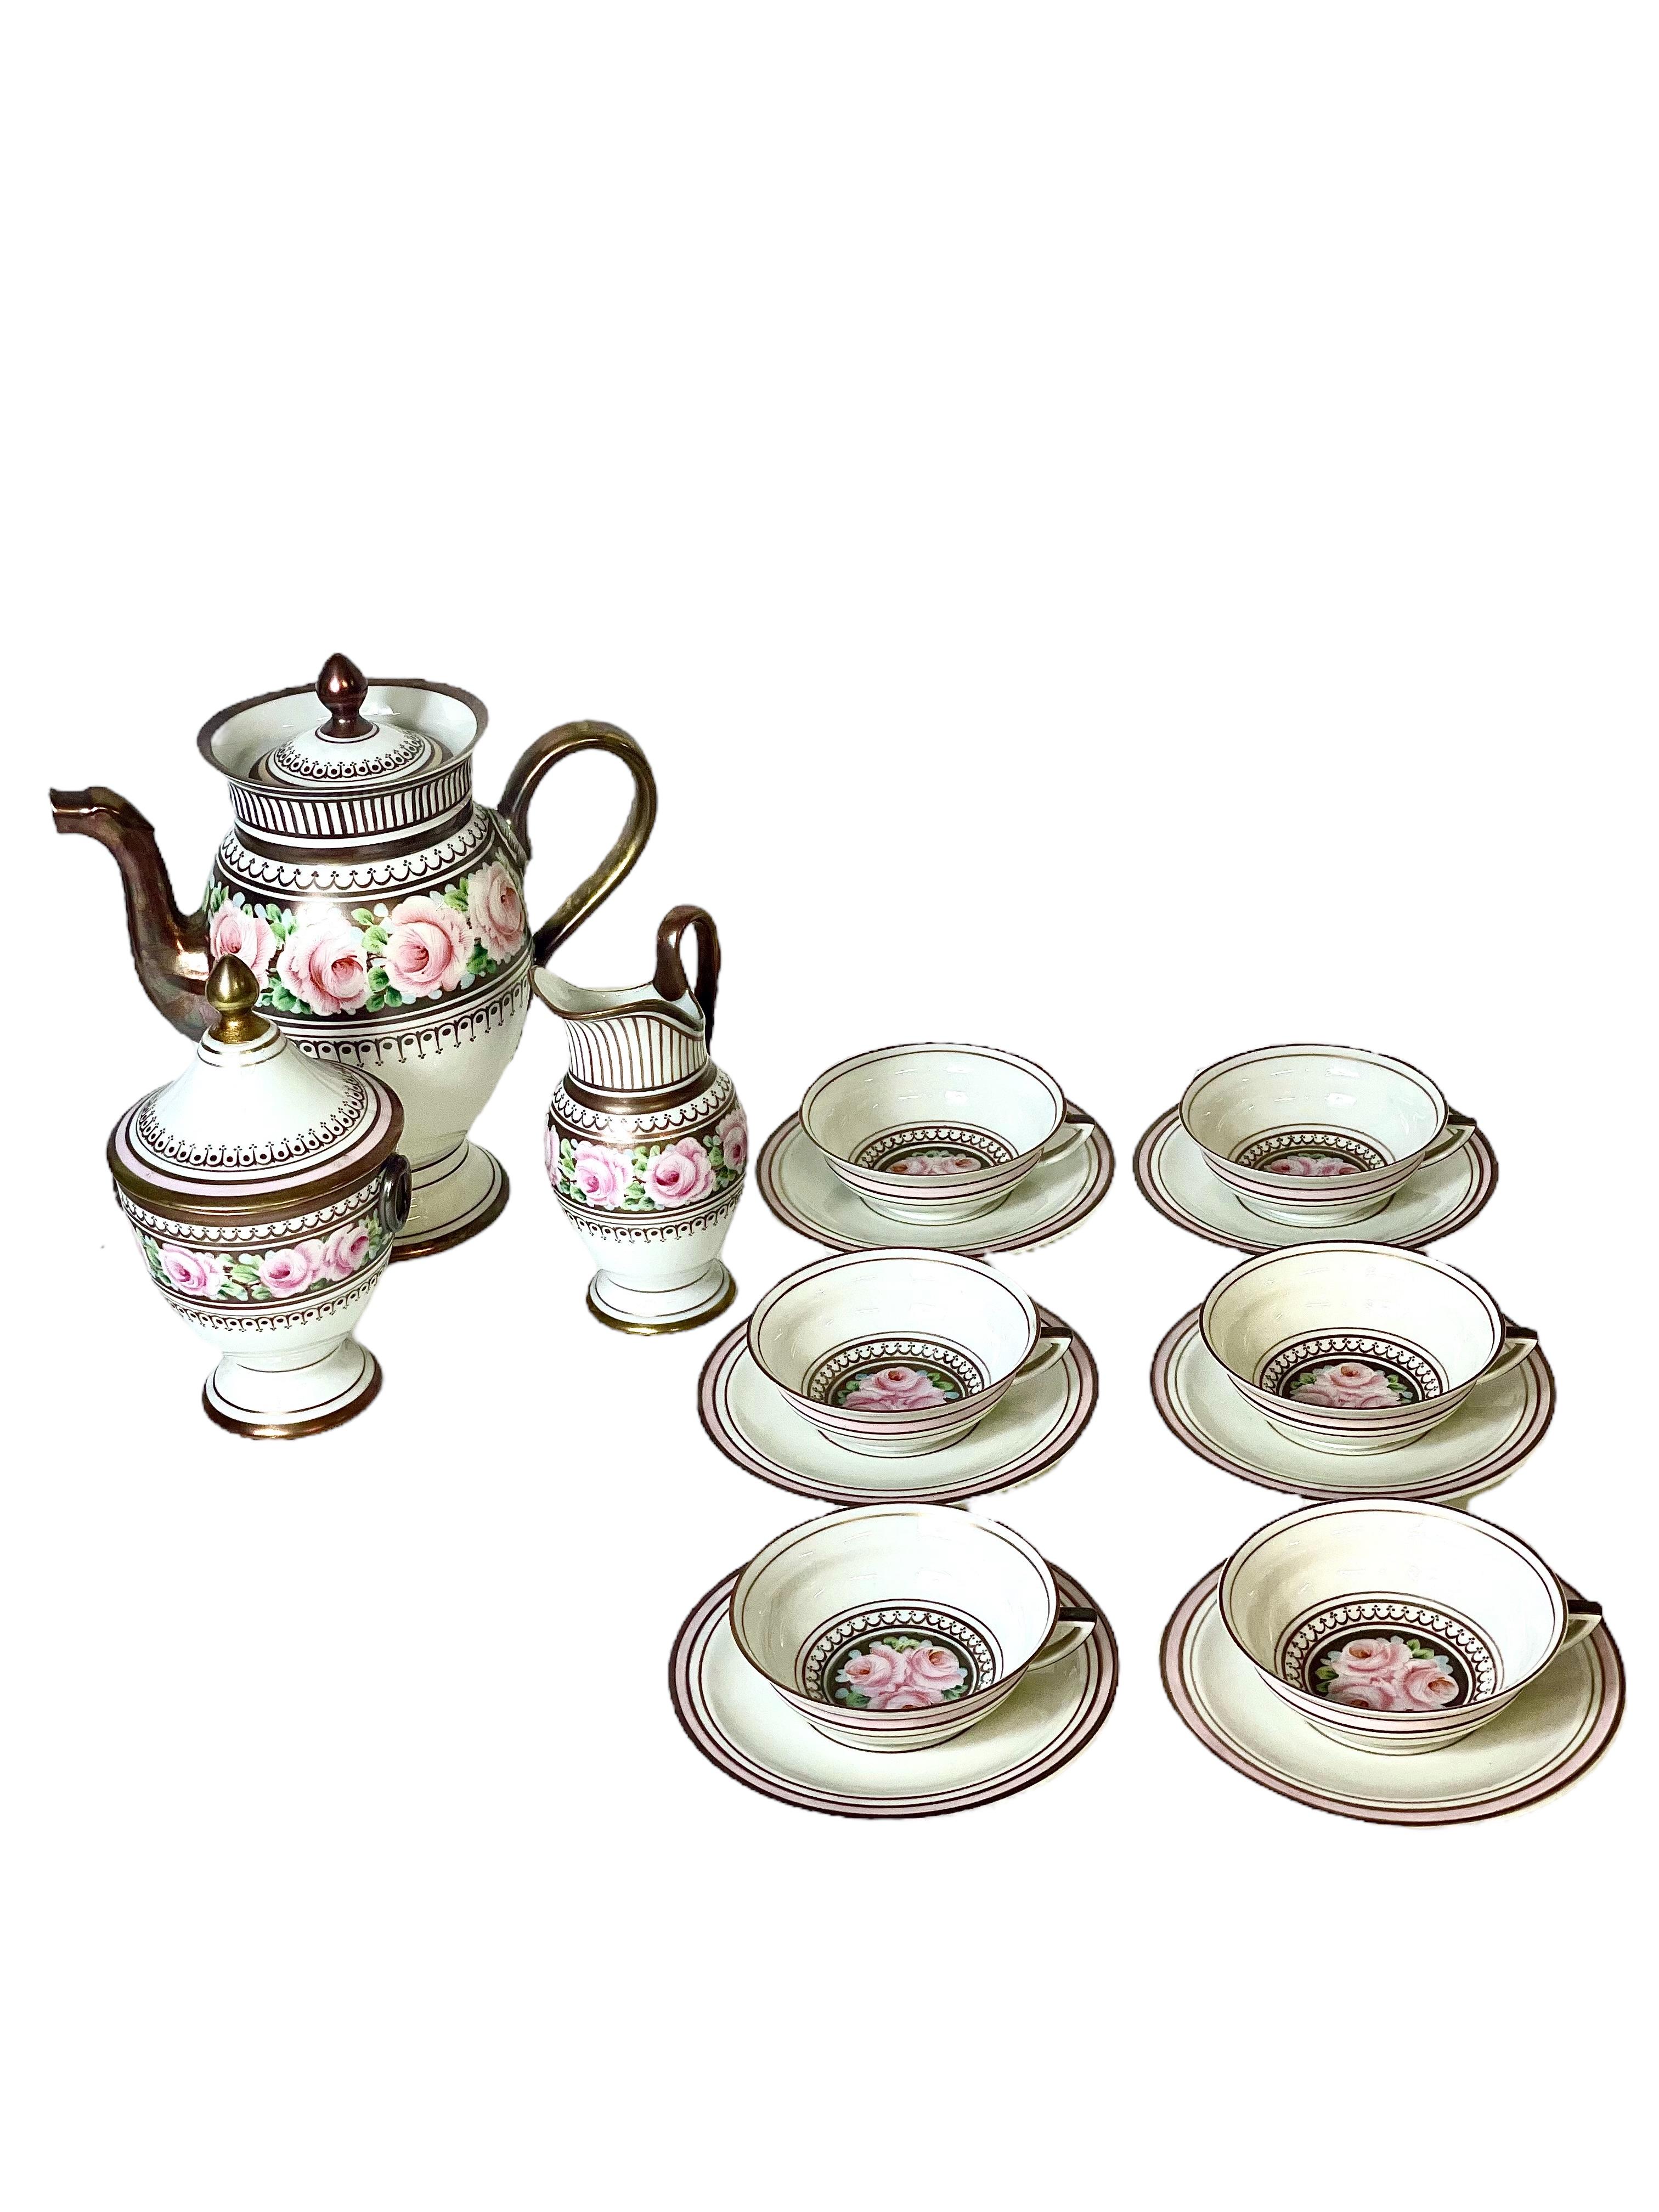 French Vintage Empire Style Porcelain Coffee Service with a decor of Flowers For Sale 1